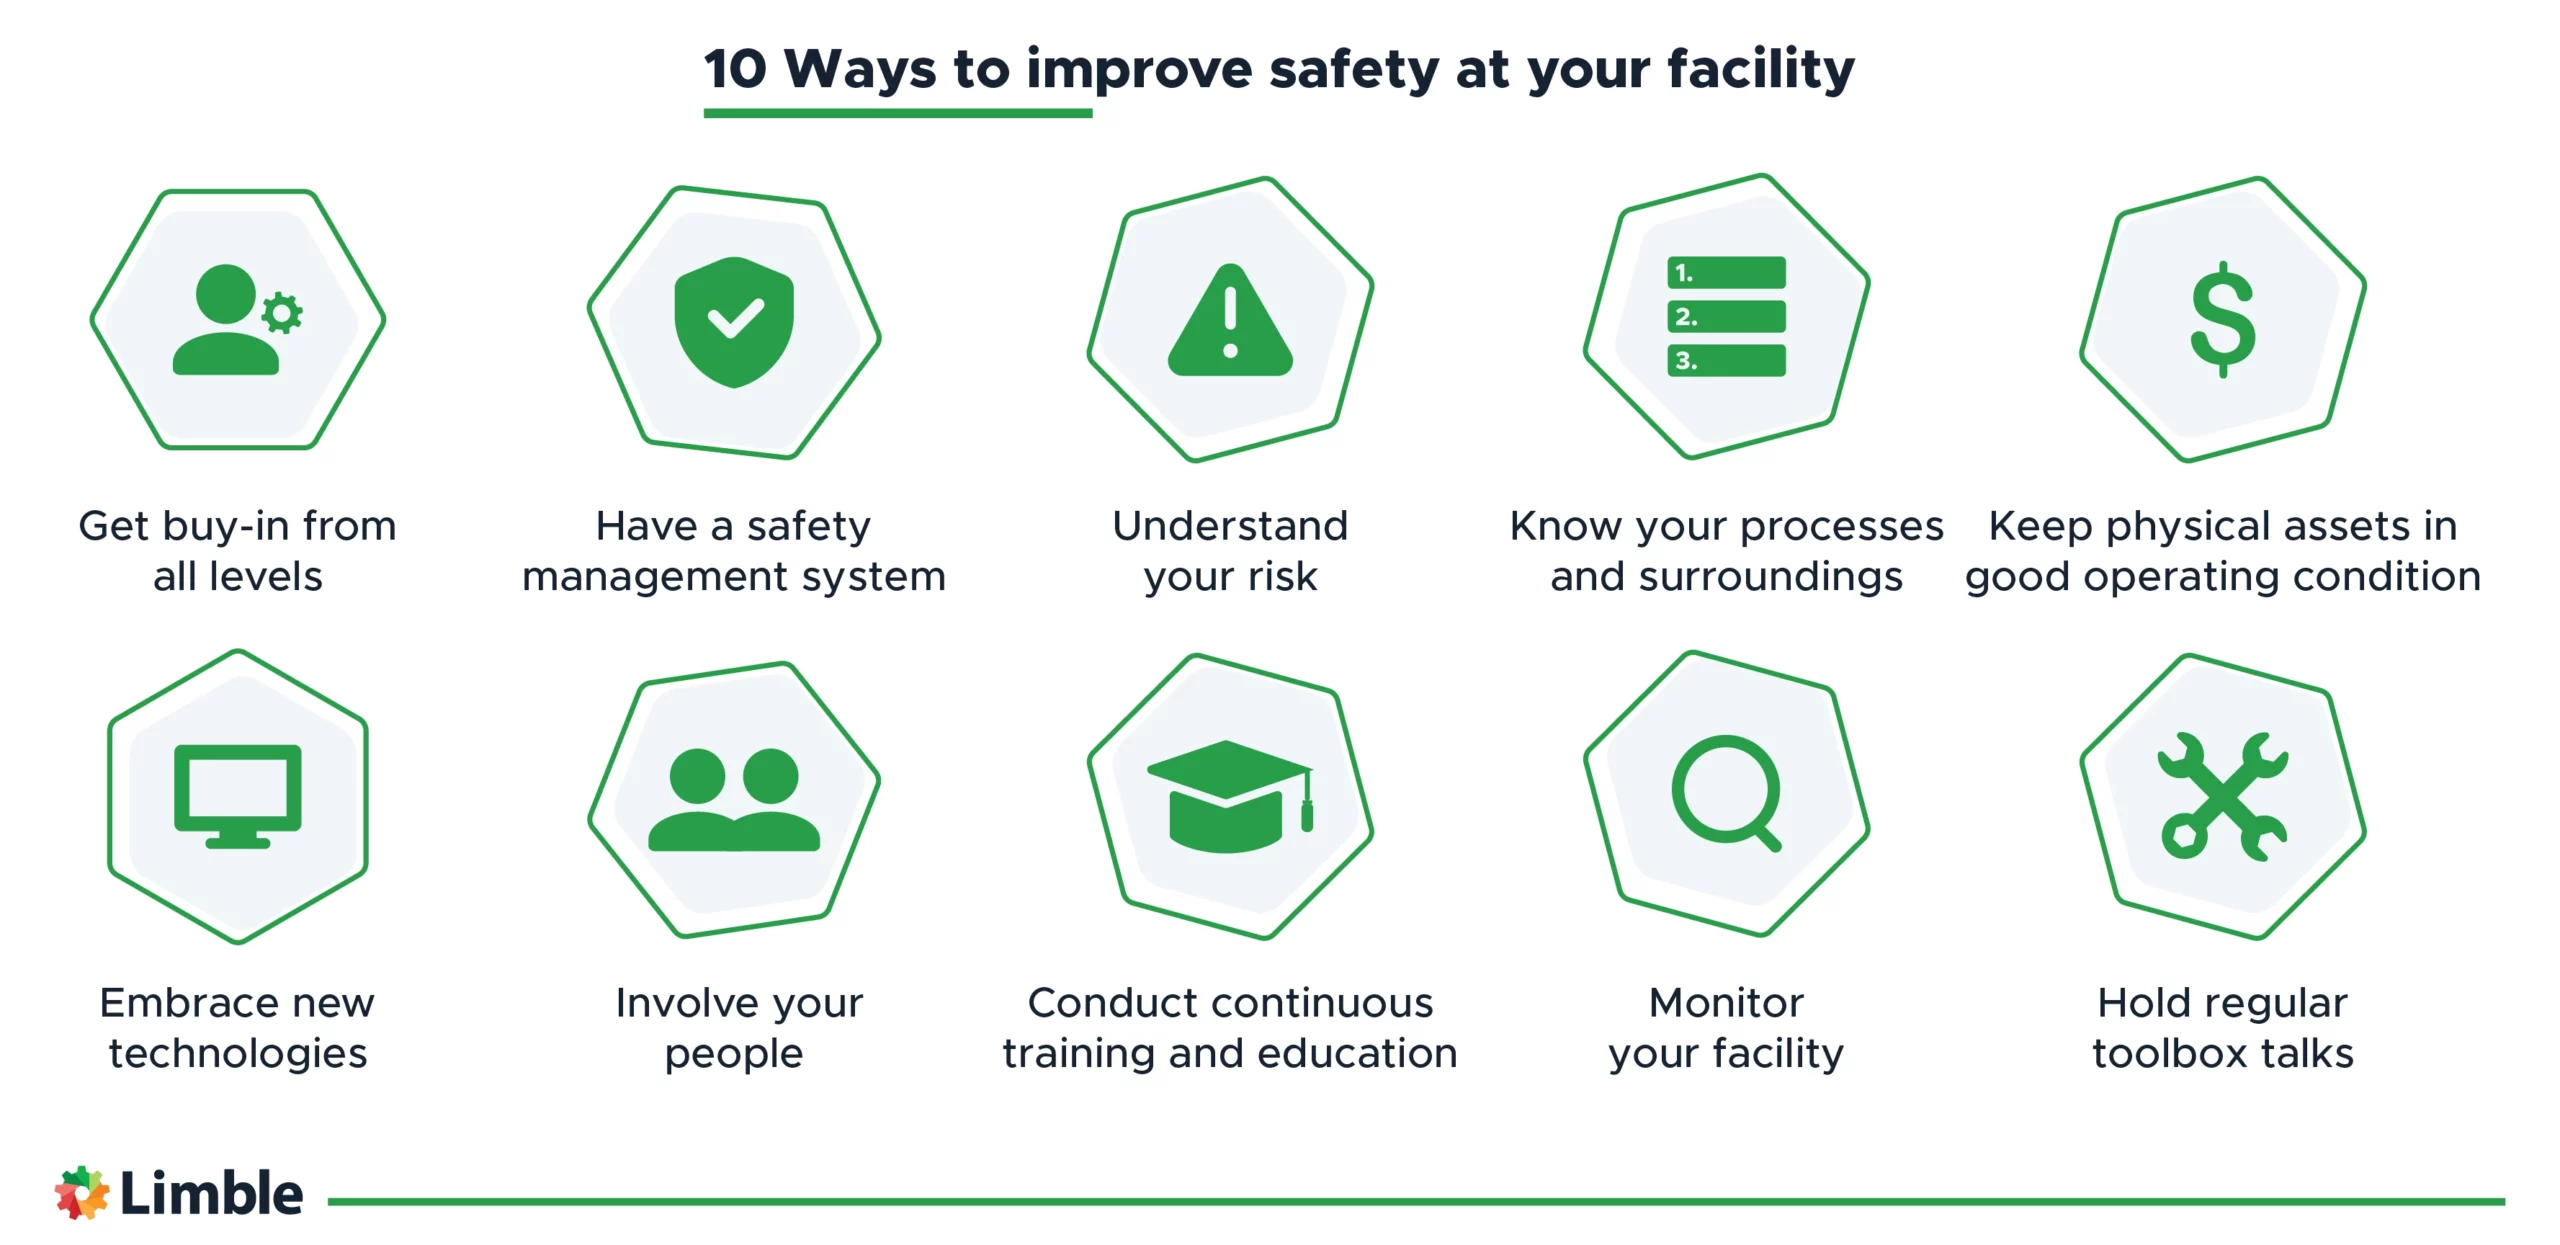 10 ways to improve safety at your facility